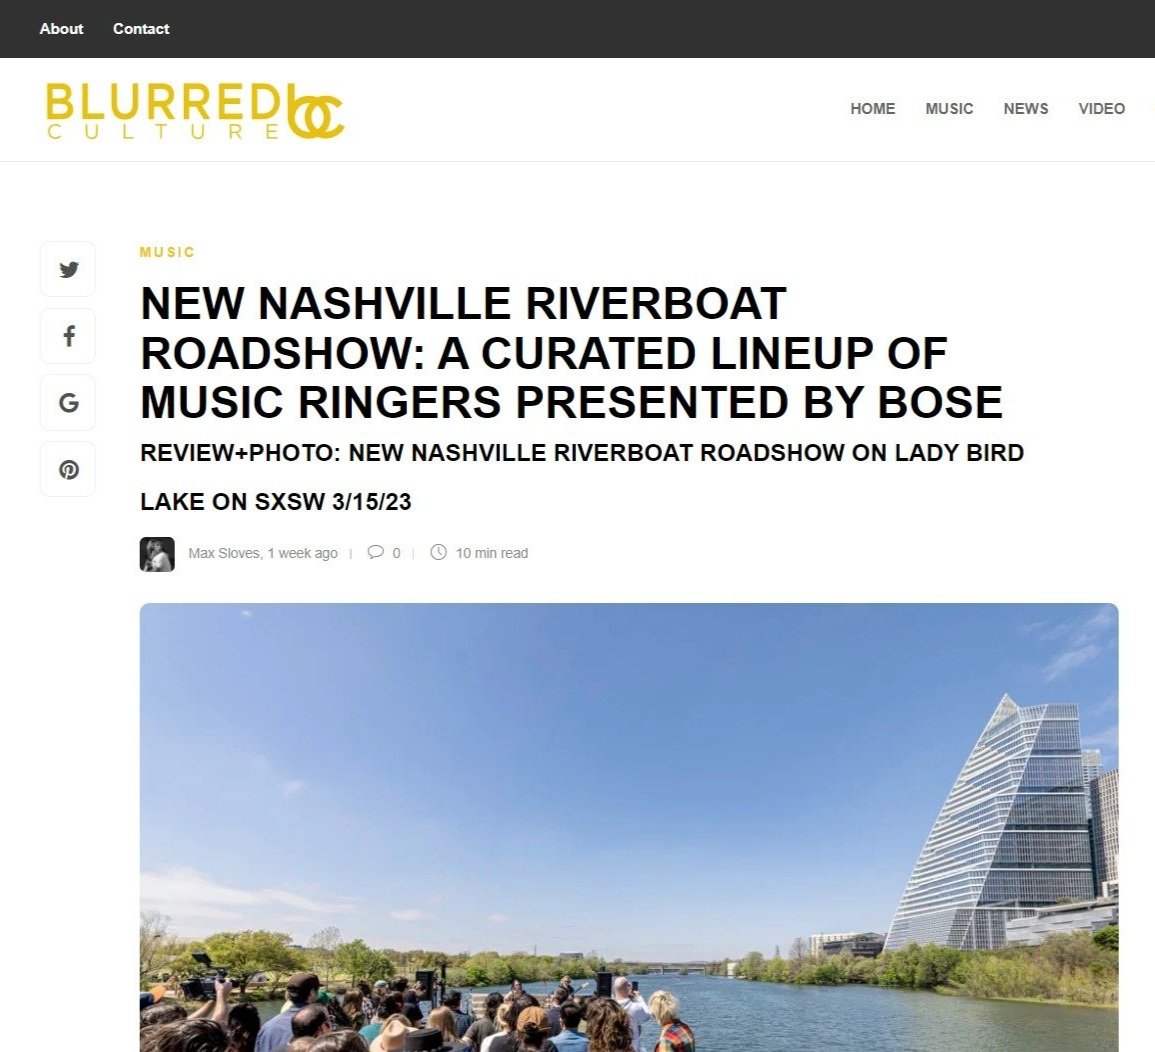 Screen+Capture+028+-+New+Nashville+Riverboat+Roadshow_+A+Curated+Lineup+of+Music+Ringers+Pre_+-+blurredculture.com.jpg